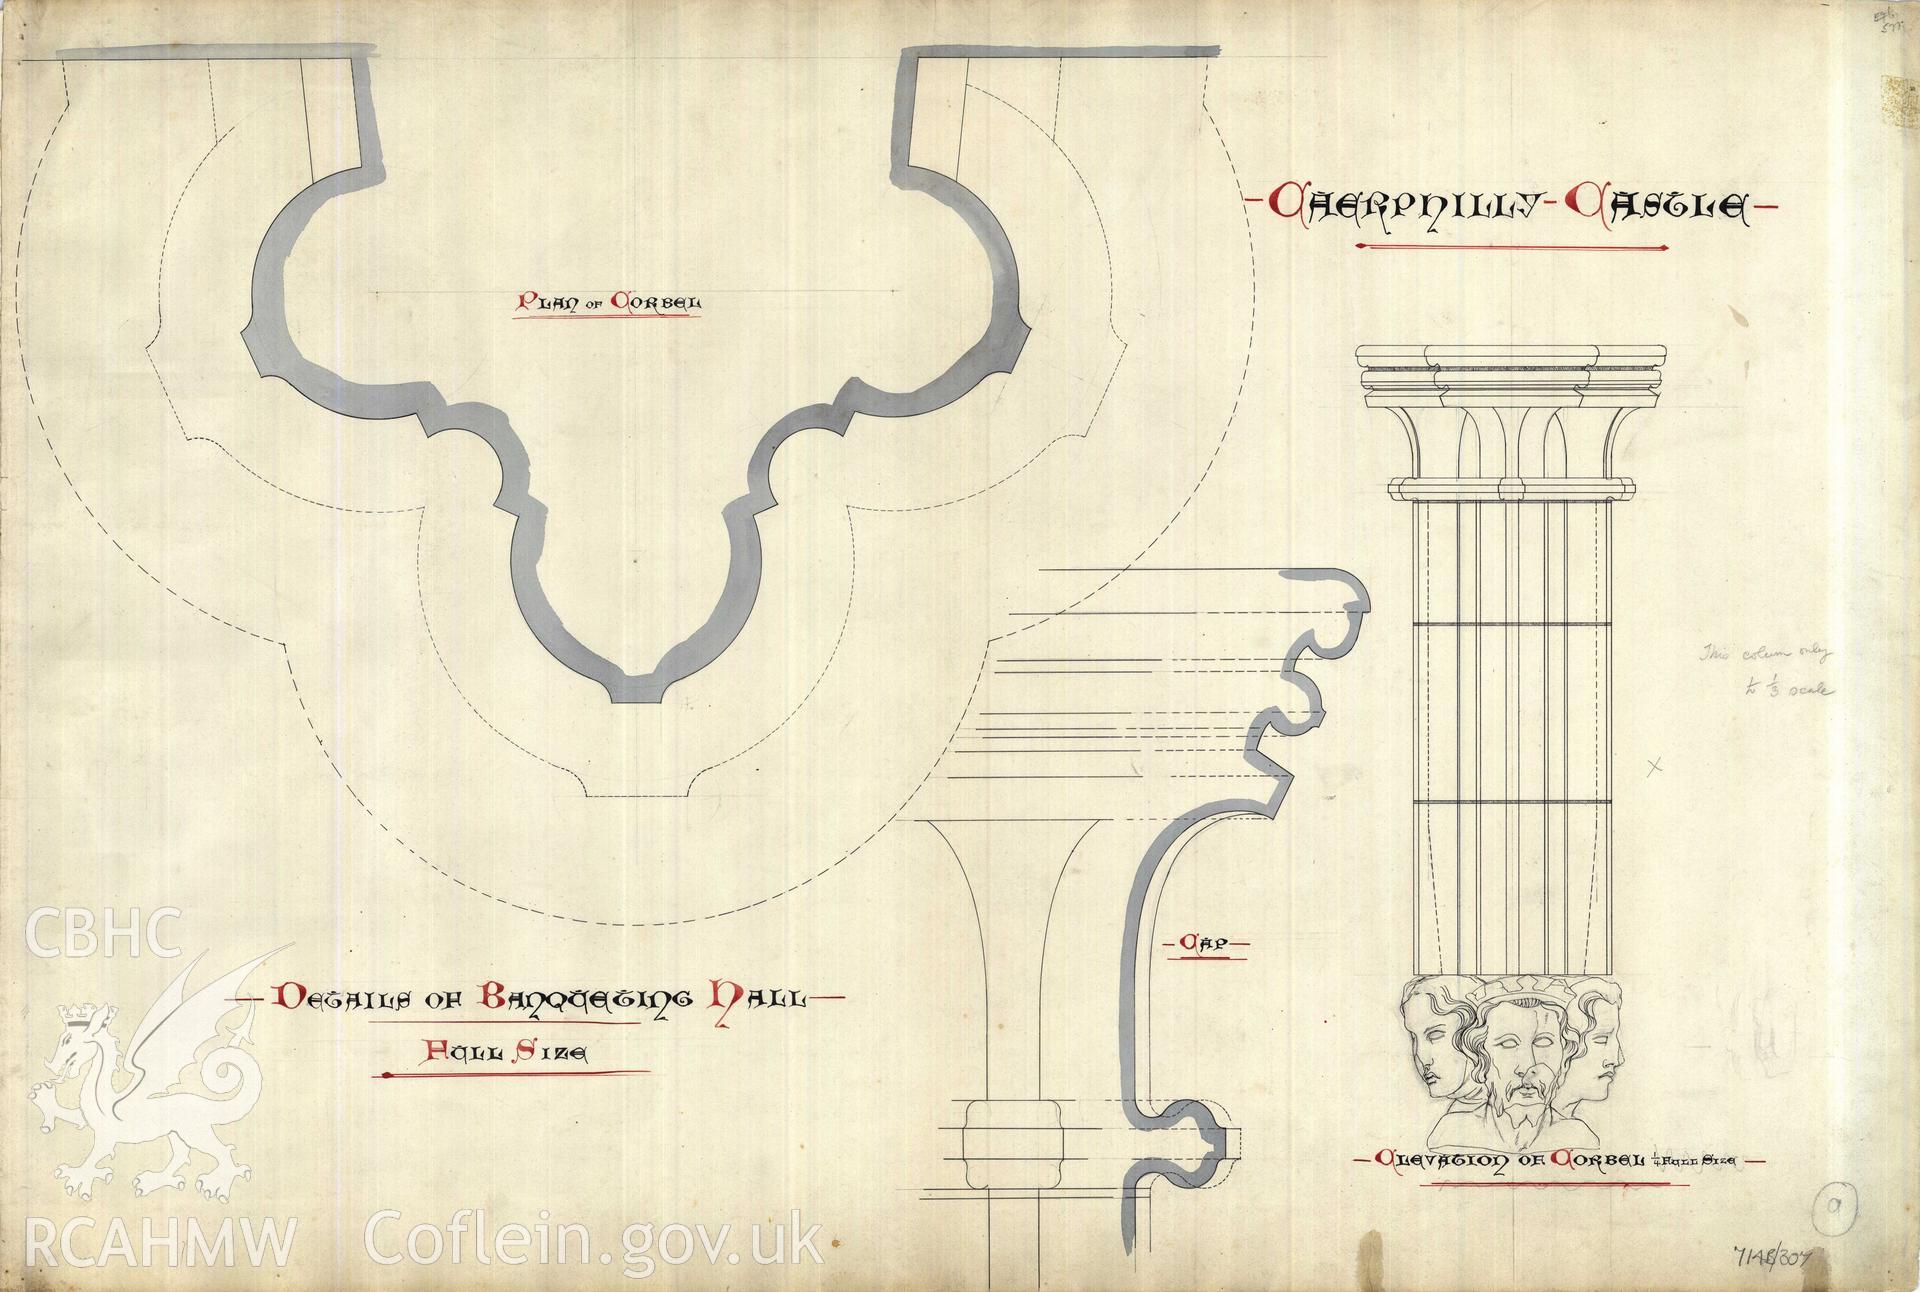 Cadw guardianship monument drawing of Caerphilly Castle. Great Hall, details. Cadw Ref. No:714B/307. Scale 1:4.1.